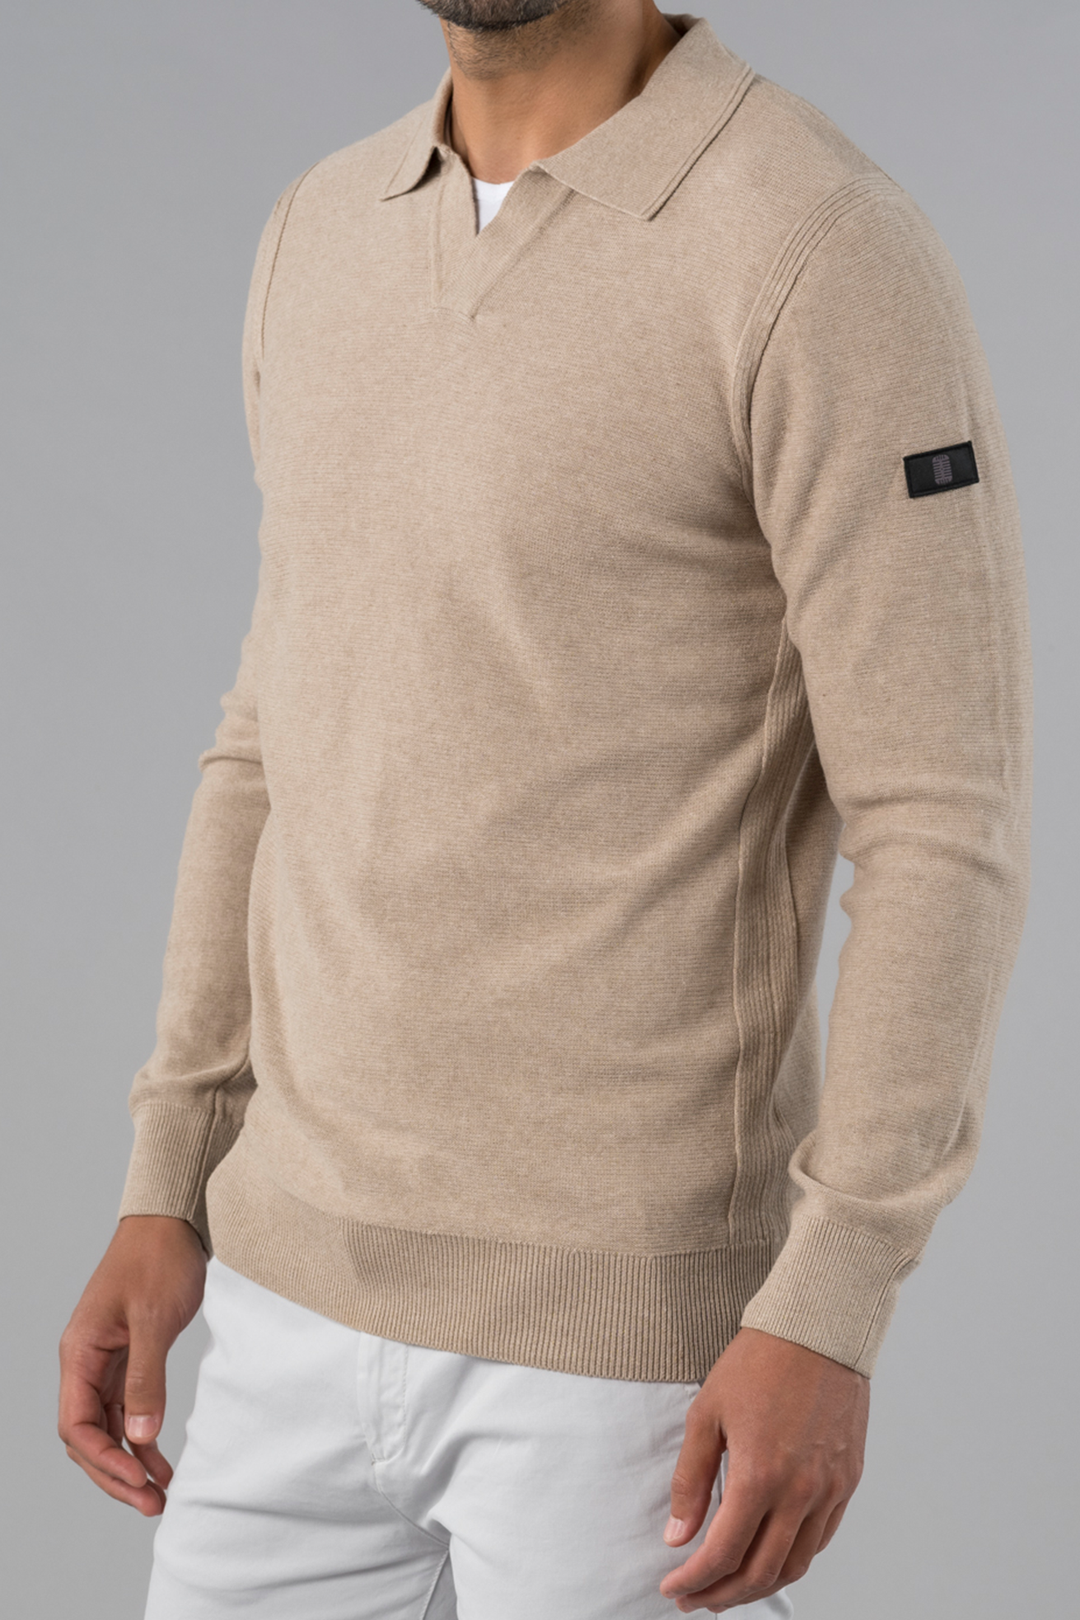 Presly & Sun - Heren Polo - Charles - Taupe